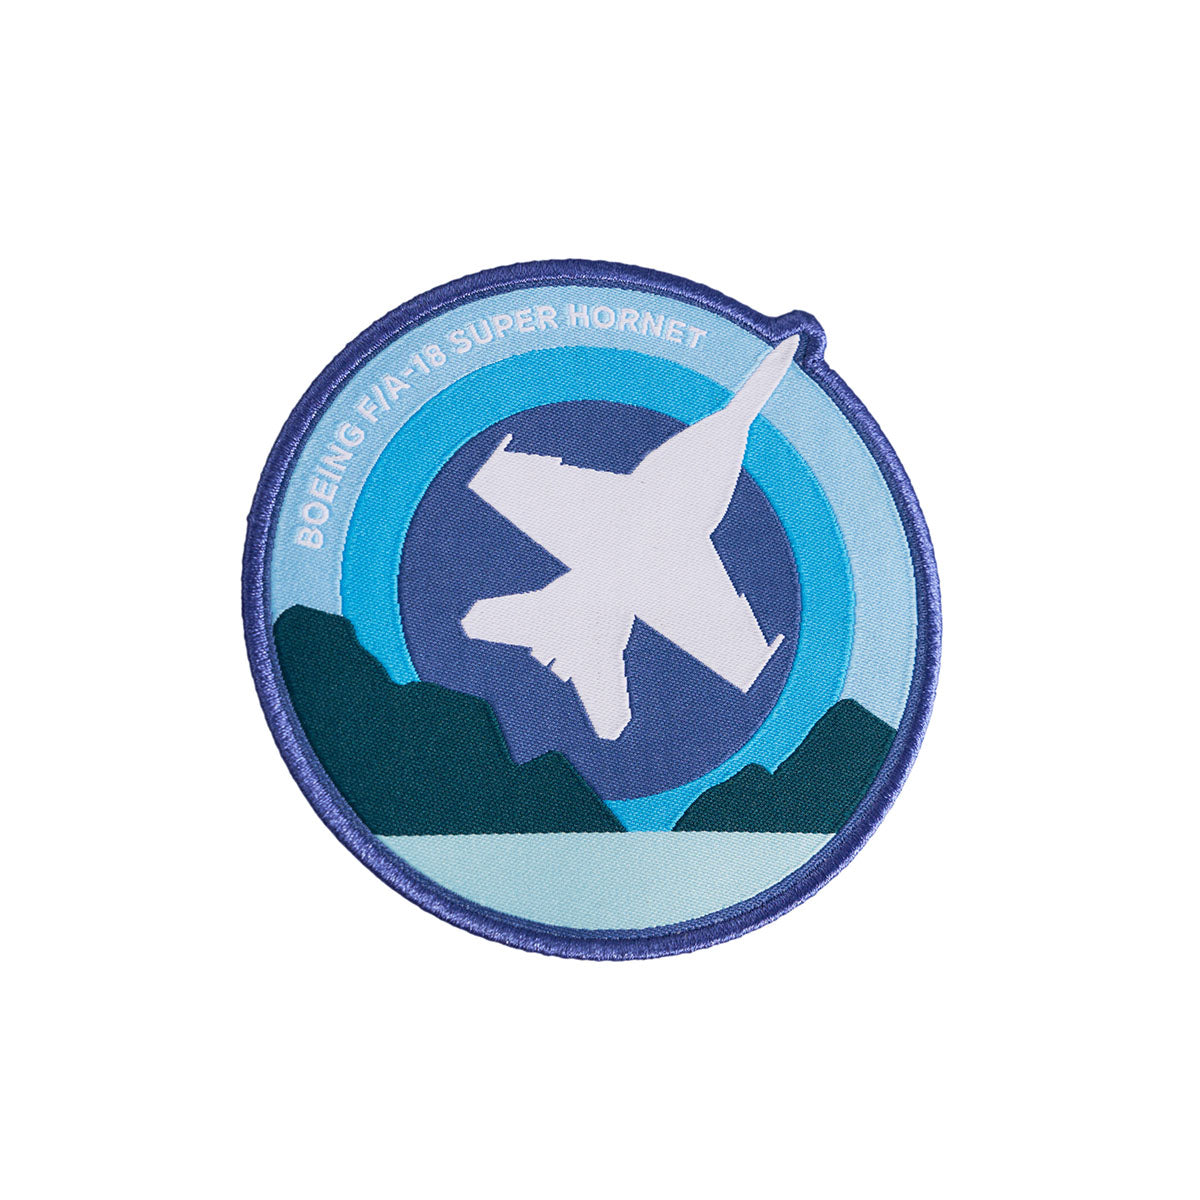 Skyward patch, featuring the iconic Boeing F/A-18 Super Hornet embroidered in a roundel design.